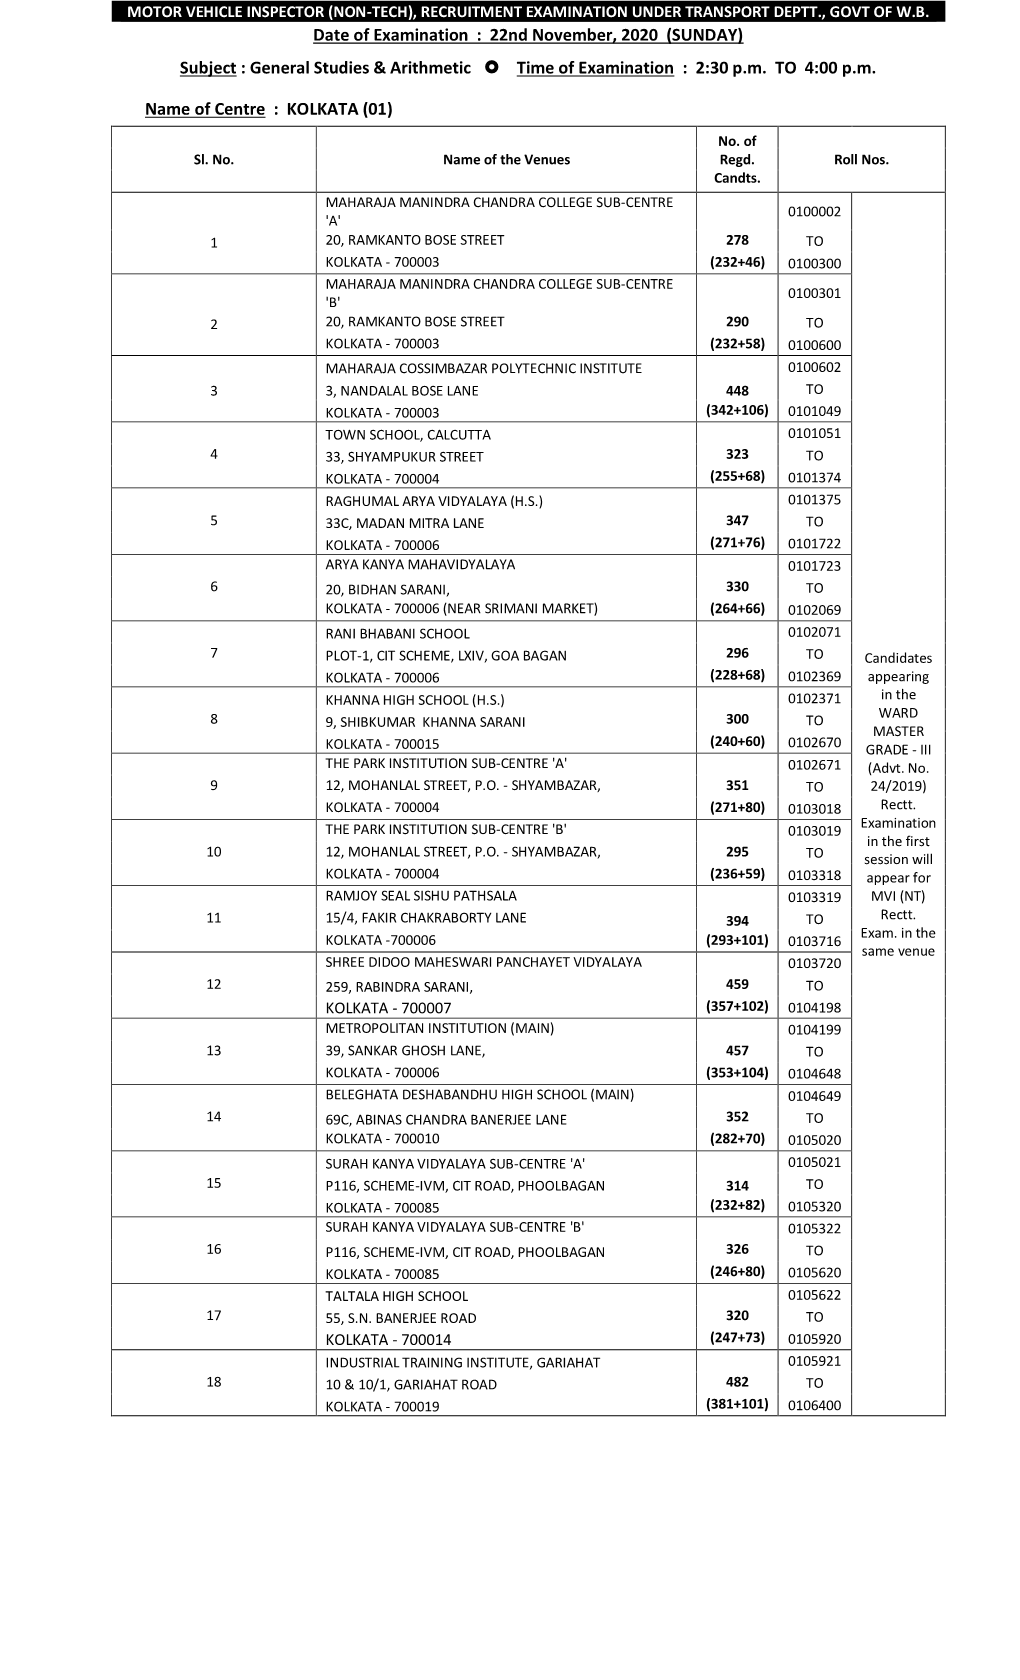 Venue Lists of Motor Vehicles Inspector (Non-Technical), Recruitment Examination Under Transport Department Govt. of W.B